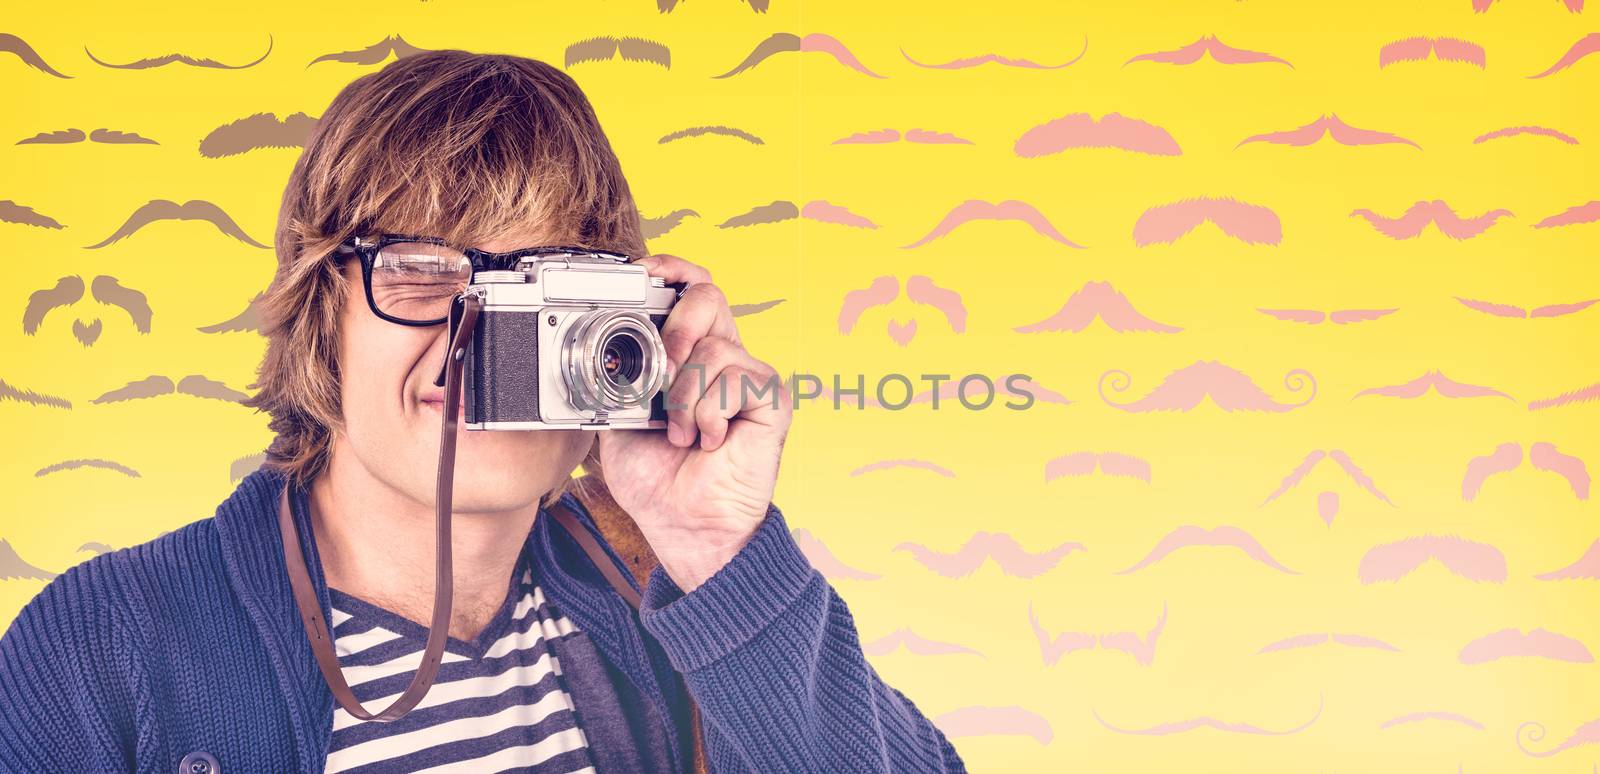 Composite image of hipster taking pictures with an old camera  by Wavebreakmedia